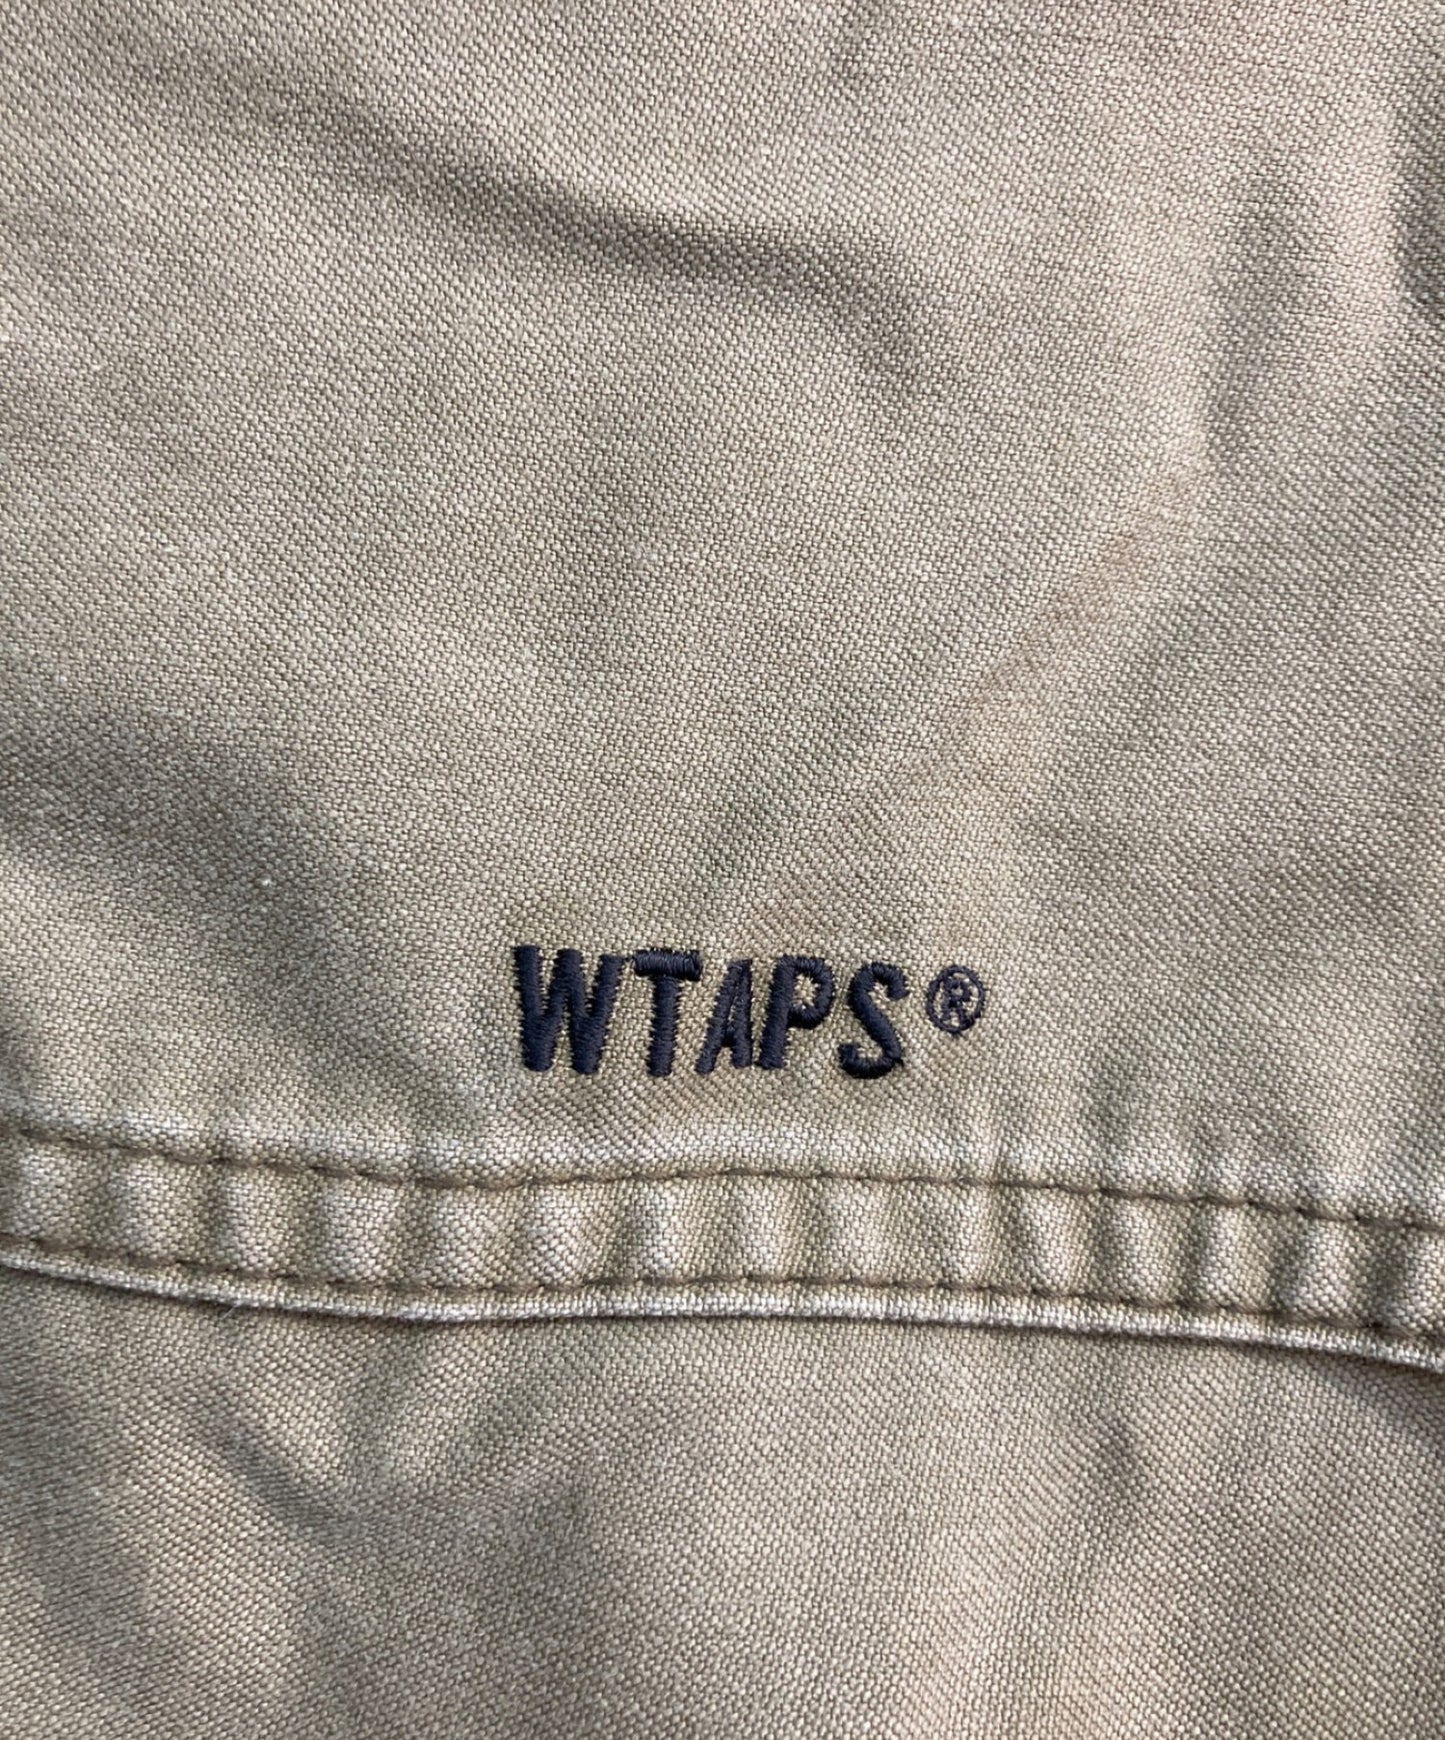 WTAPS Bio-Washed Cotton Full Zip Military Jacket 201WVDT-JKM03 201WVDT-JKM03